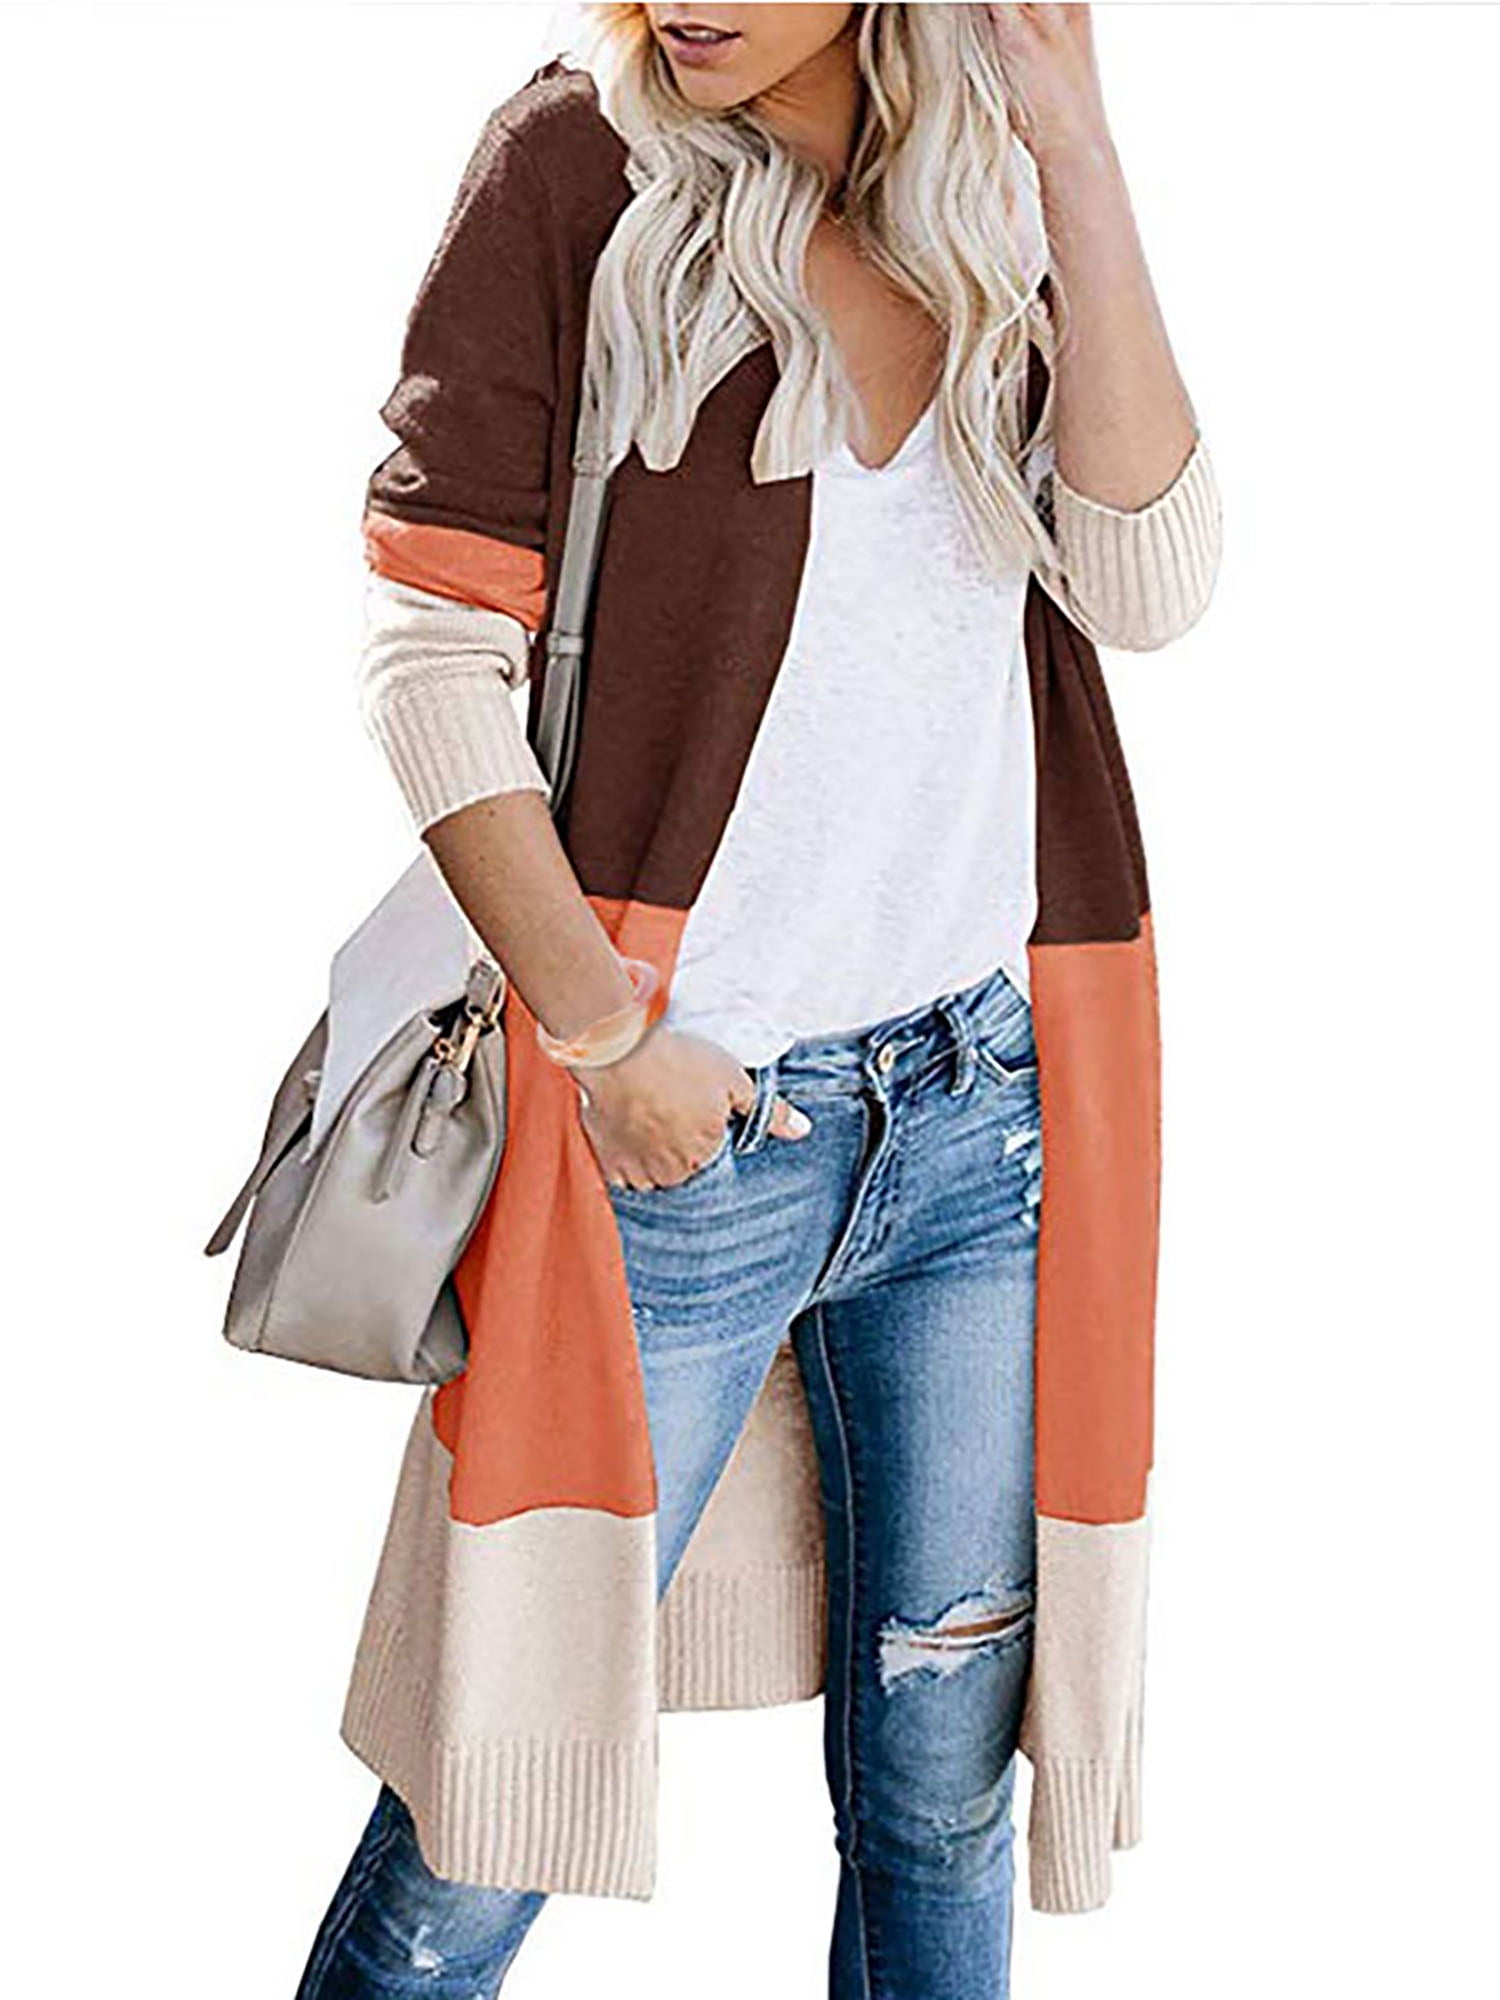 HUUSA Womens Fashion Open Front Color Block Long Cardigan Sweater Coat with Pockets 